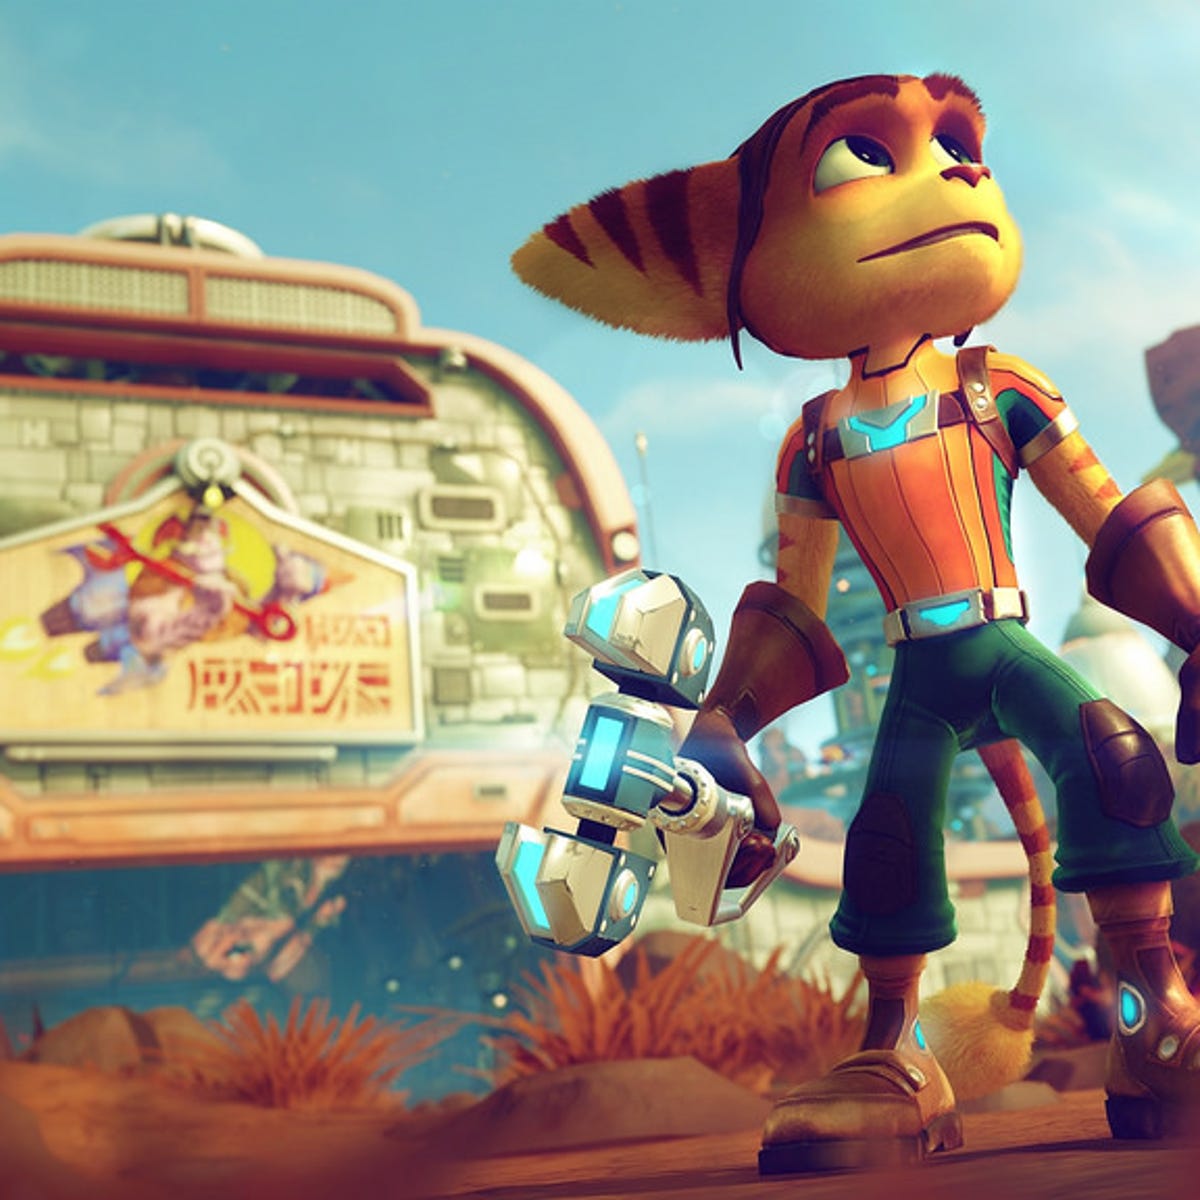 You can get Ratchet & Clank PS4 for free - CNET